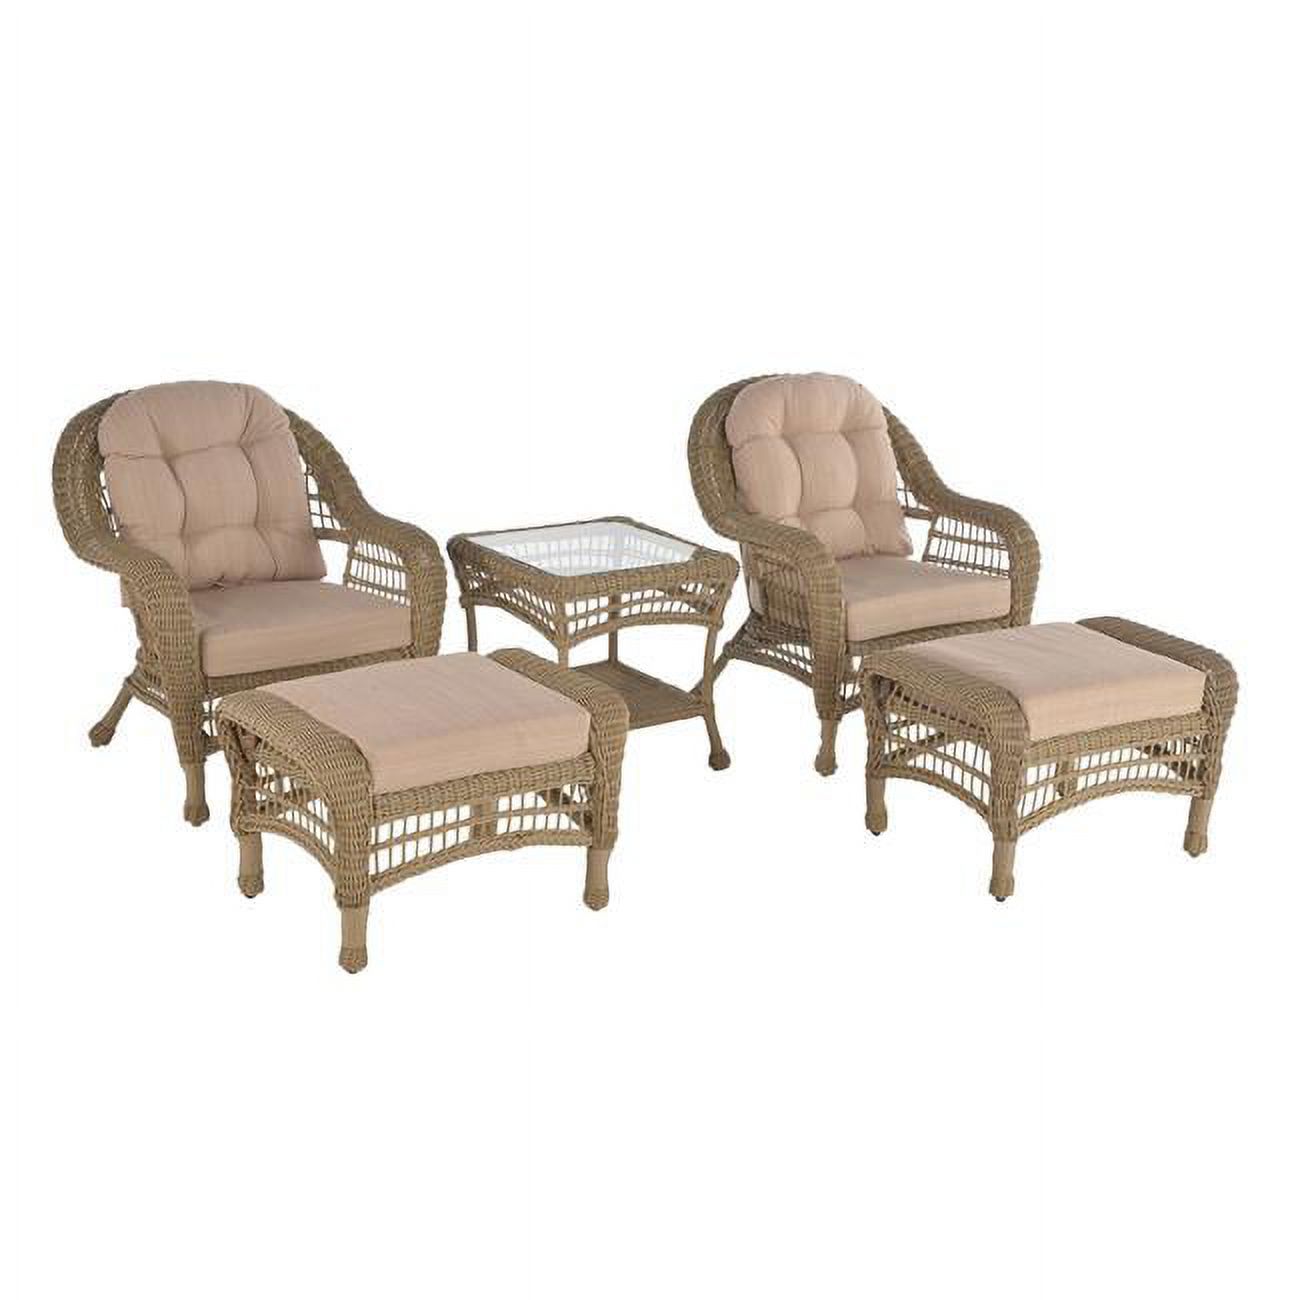 Outdoor Garden Conversation Set with Ottomans & End Table - 5 Piece - image 1 of 1